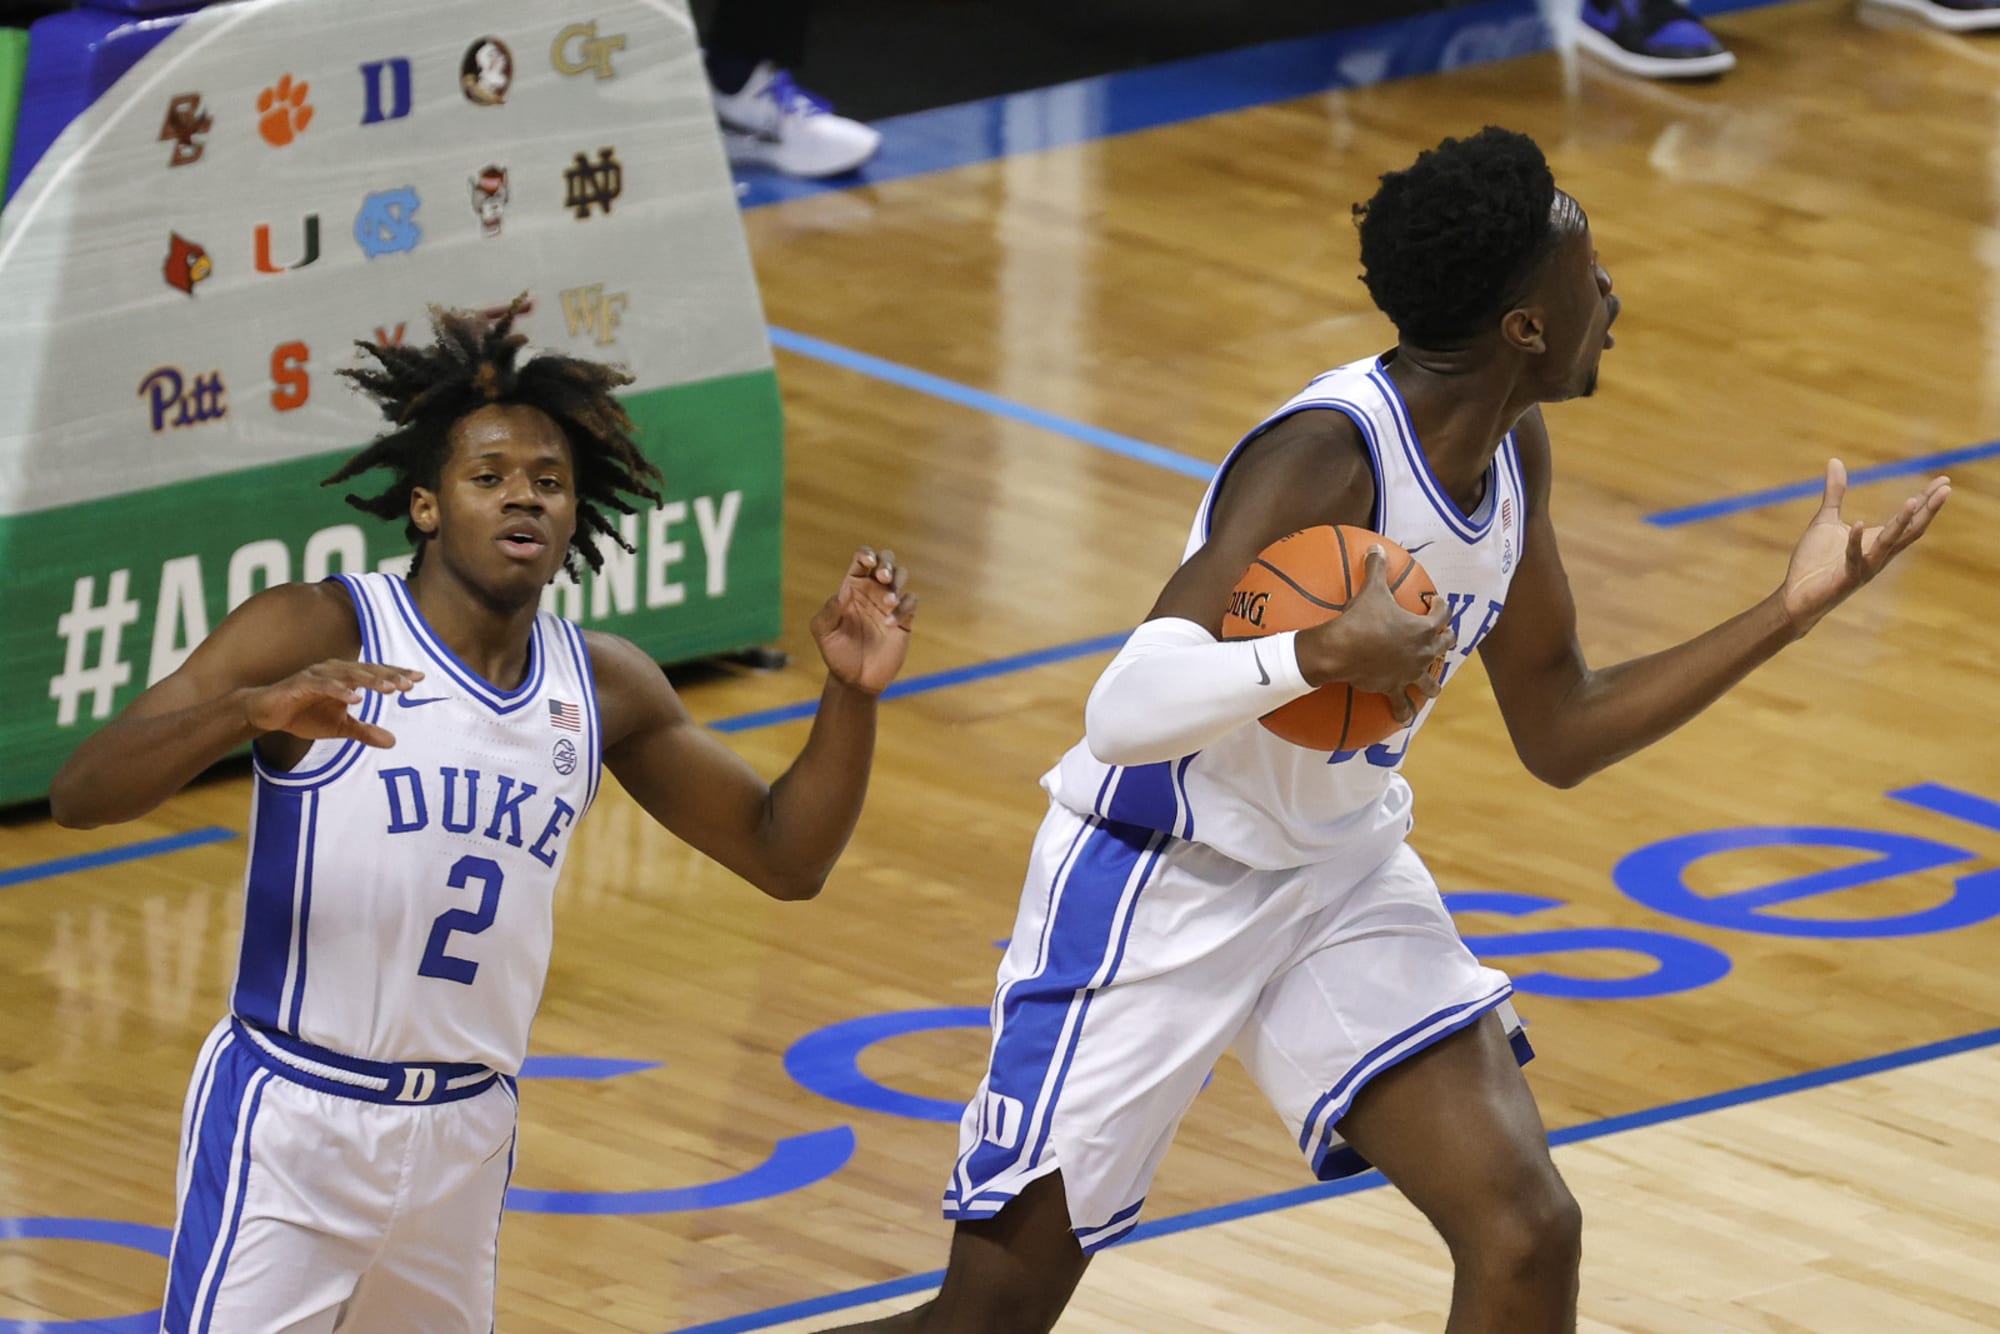 ChronSports' Top 10 of 2021 — No. 6: Duke men's basketball's season ends on  positive COVID-19 test - The Chronicle